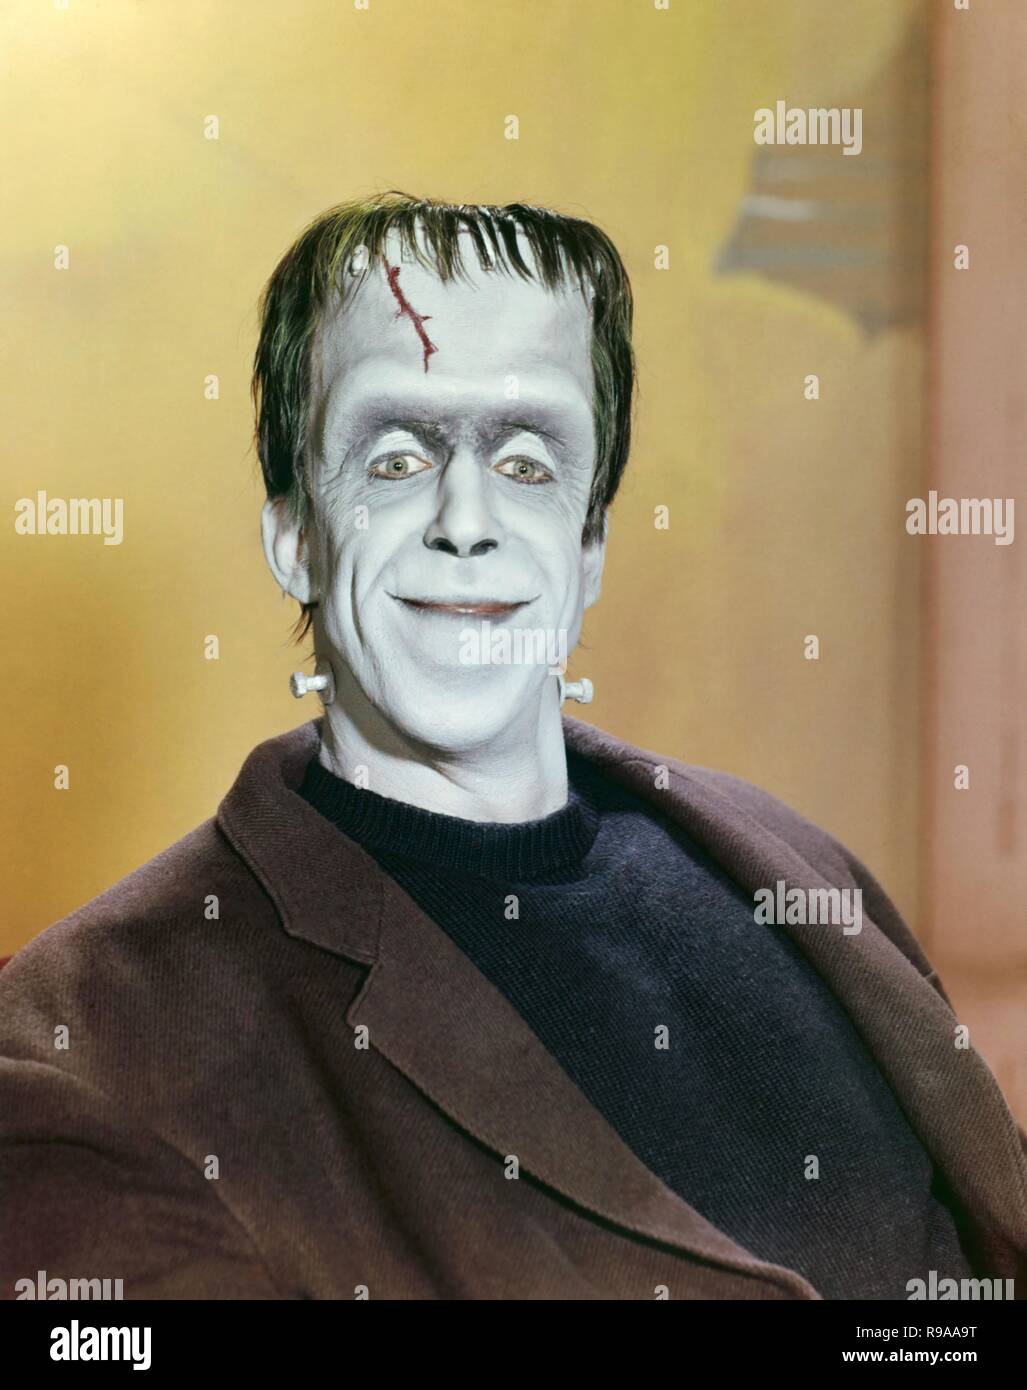 Original film title: THE MUNSTERS. English title: THE MUNSTERS. Year: 1964. Stars: FRED GWYNNE. Credit: CBS/MCA/UNIVERSAL / Album Stock Photo